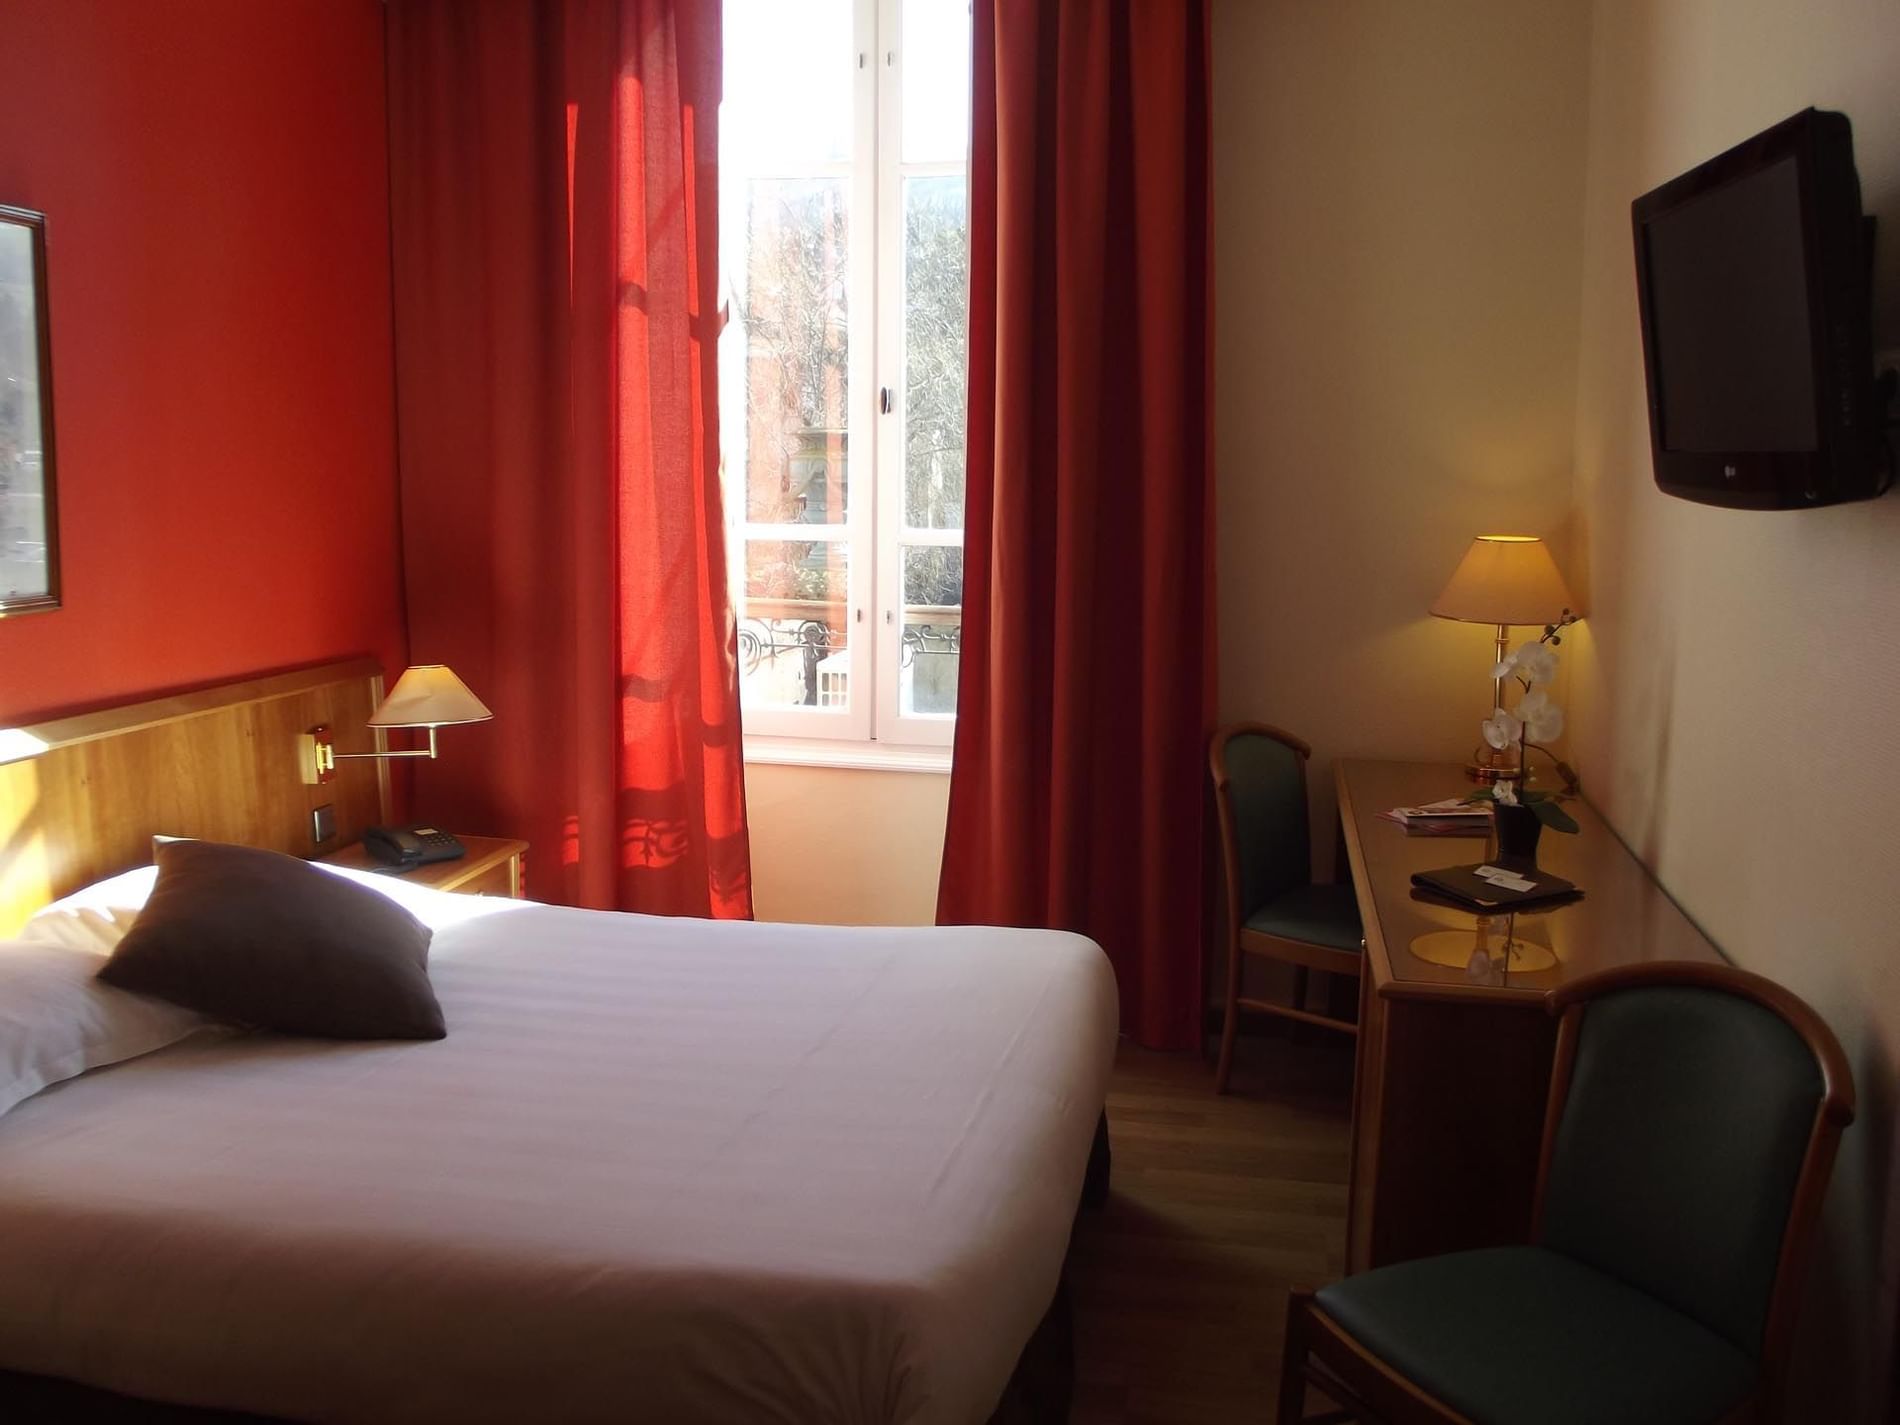 A room at the Grand Hôtel Saint-Pierre with one bed